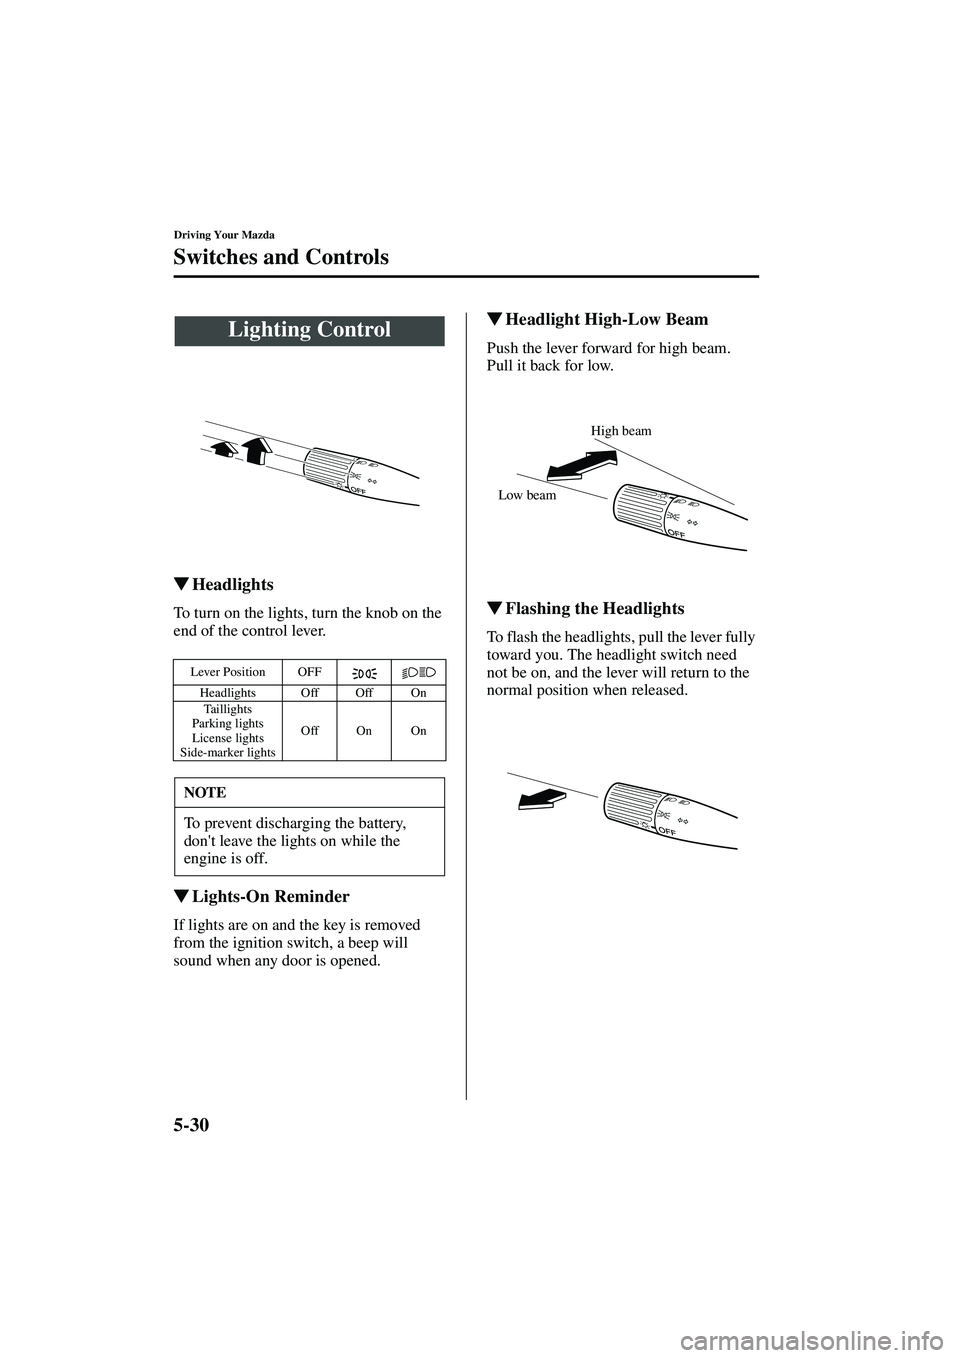 MAZDA MODEL MX-5 MIATA 2003  Owners Manual 5-30
Driving Your Mazda
Form No. 8R09-EA-02G
Switches and Controls
Headlights
To turn on the lights, turn the knob on the 
end of the control lever.
Lights-On Reminder
If lights are on and the key i